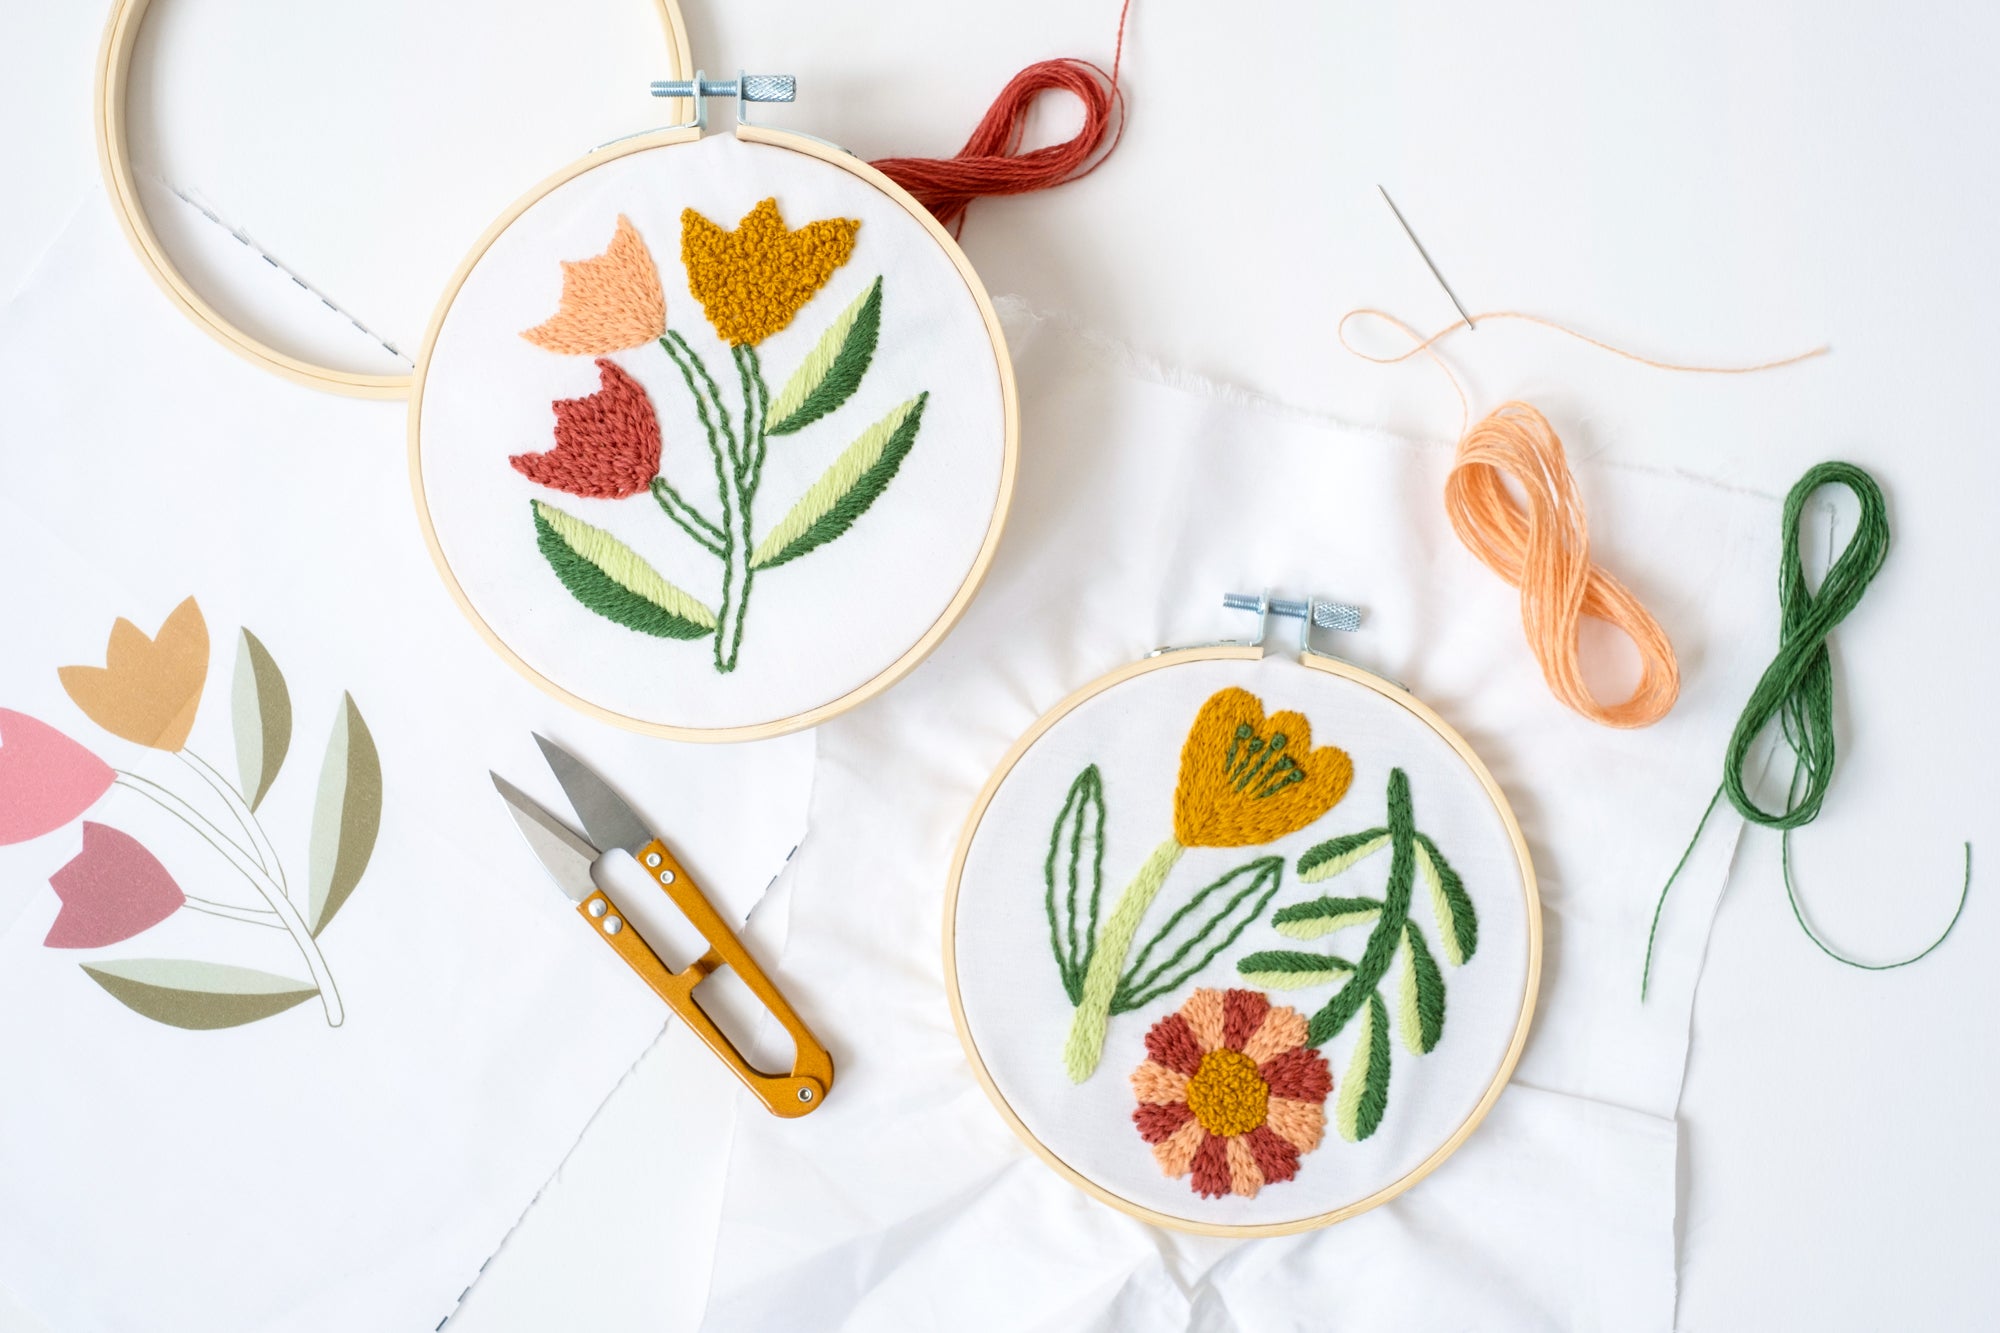 Beginner’s Guide to Learning Embroidery